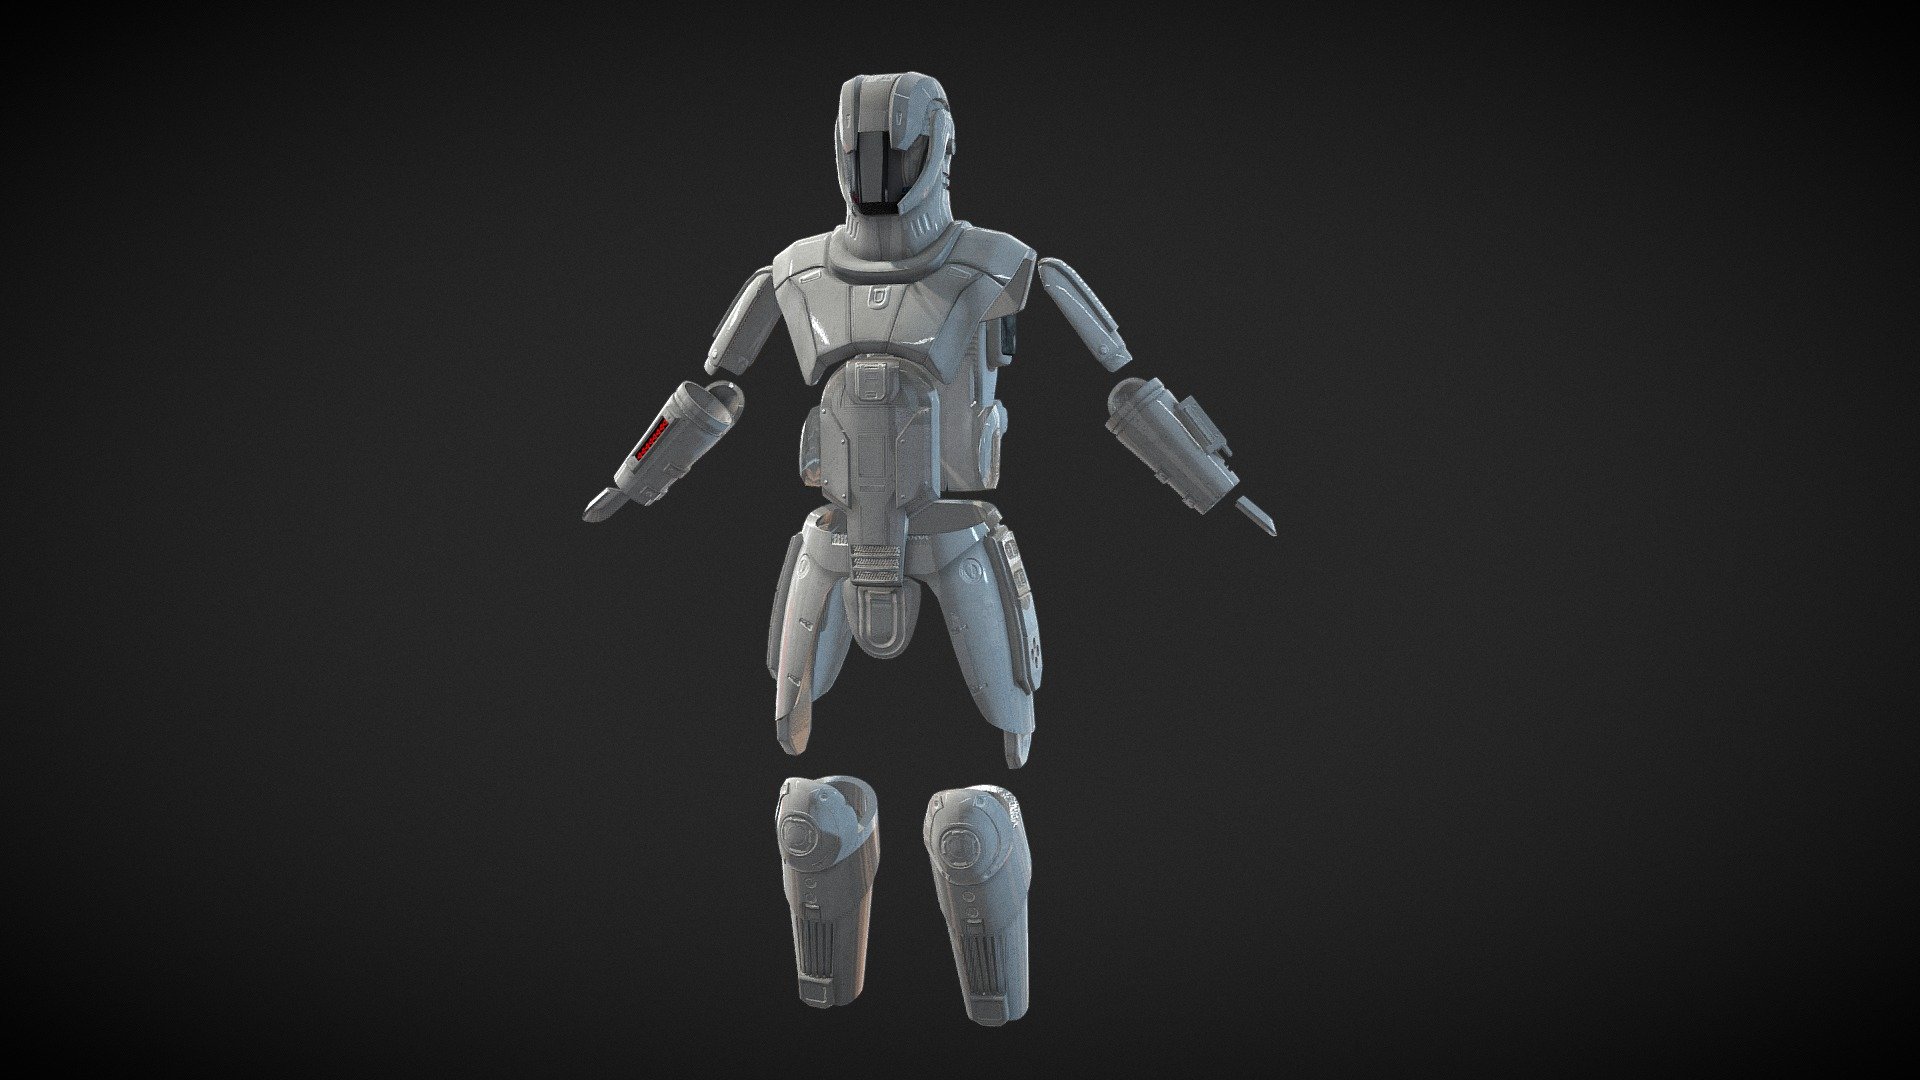 KOTOR Sith Trooper Armor inspired from KOTOR - Armor Model/Texture work by Outworld Studios

Must give credit to Outworld Studios if using this asset

Show support by joining my discord: https://discord.gg/EgWSkp8Cxn

Portoflio: https://www.artstation.com/outworldstudios - KOTOR Sith Trooper Armor - Star Wars - Buy Royalty Free 3D model by Outworld Studios (@outworldstudios) 3d model